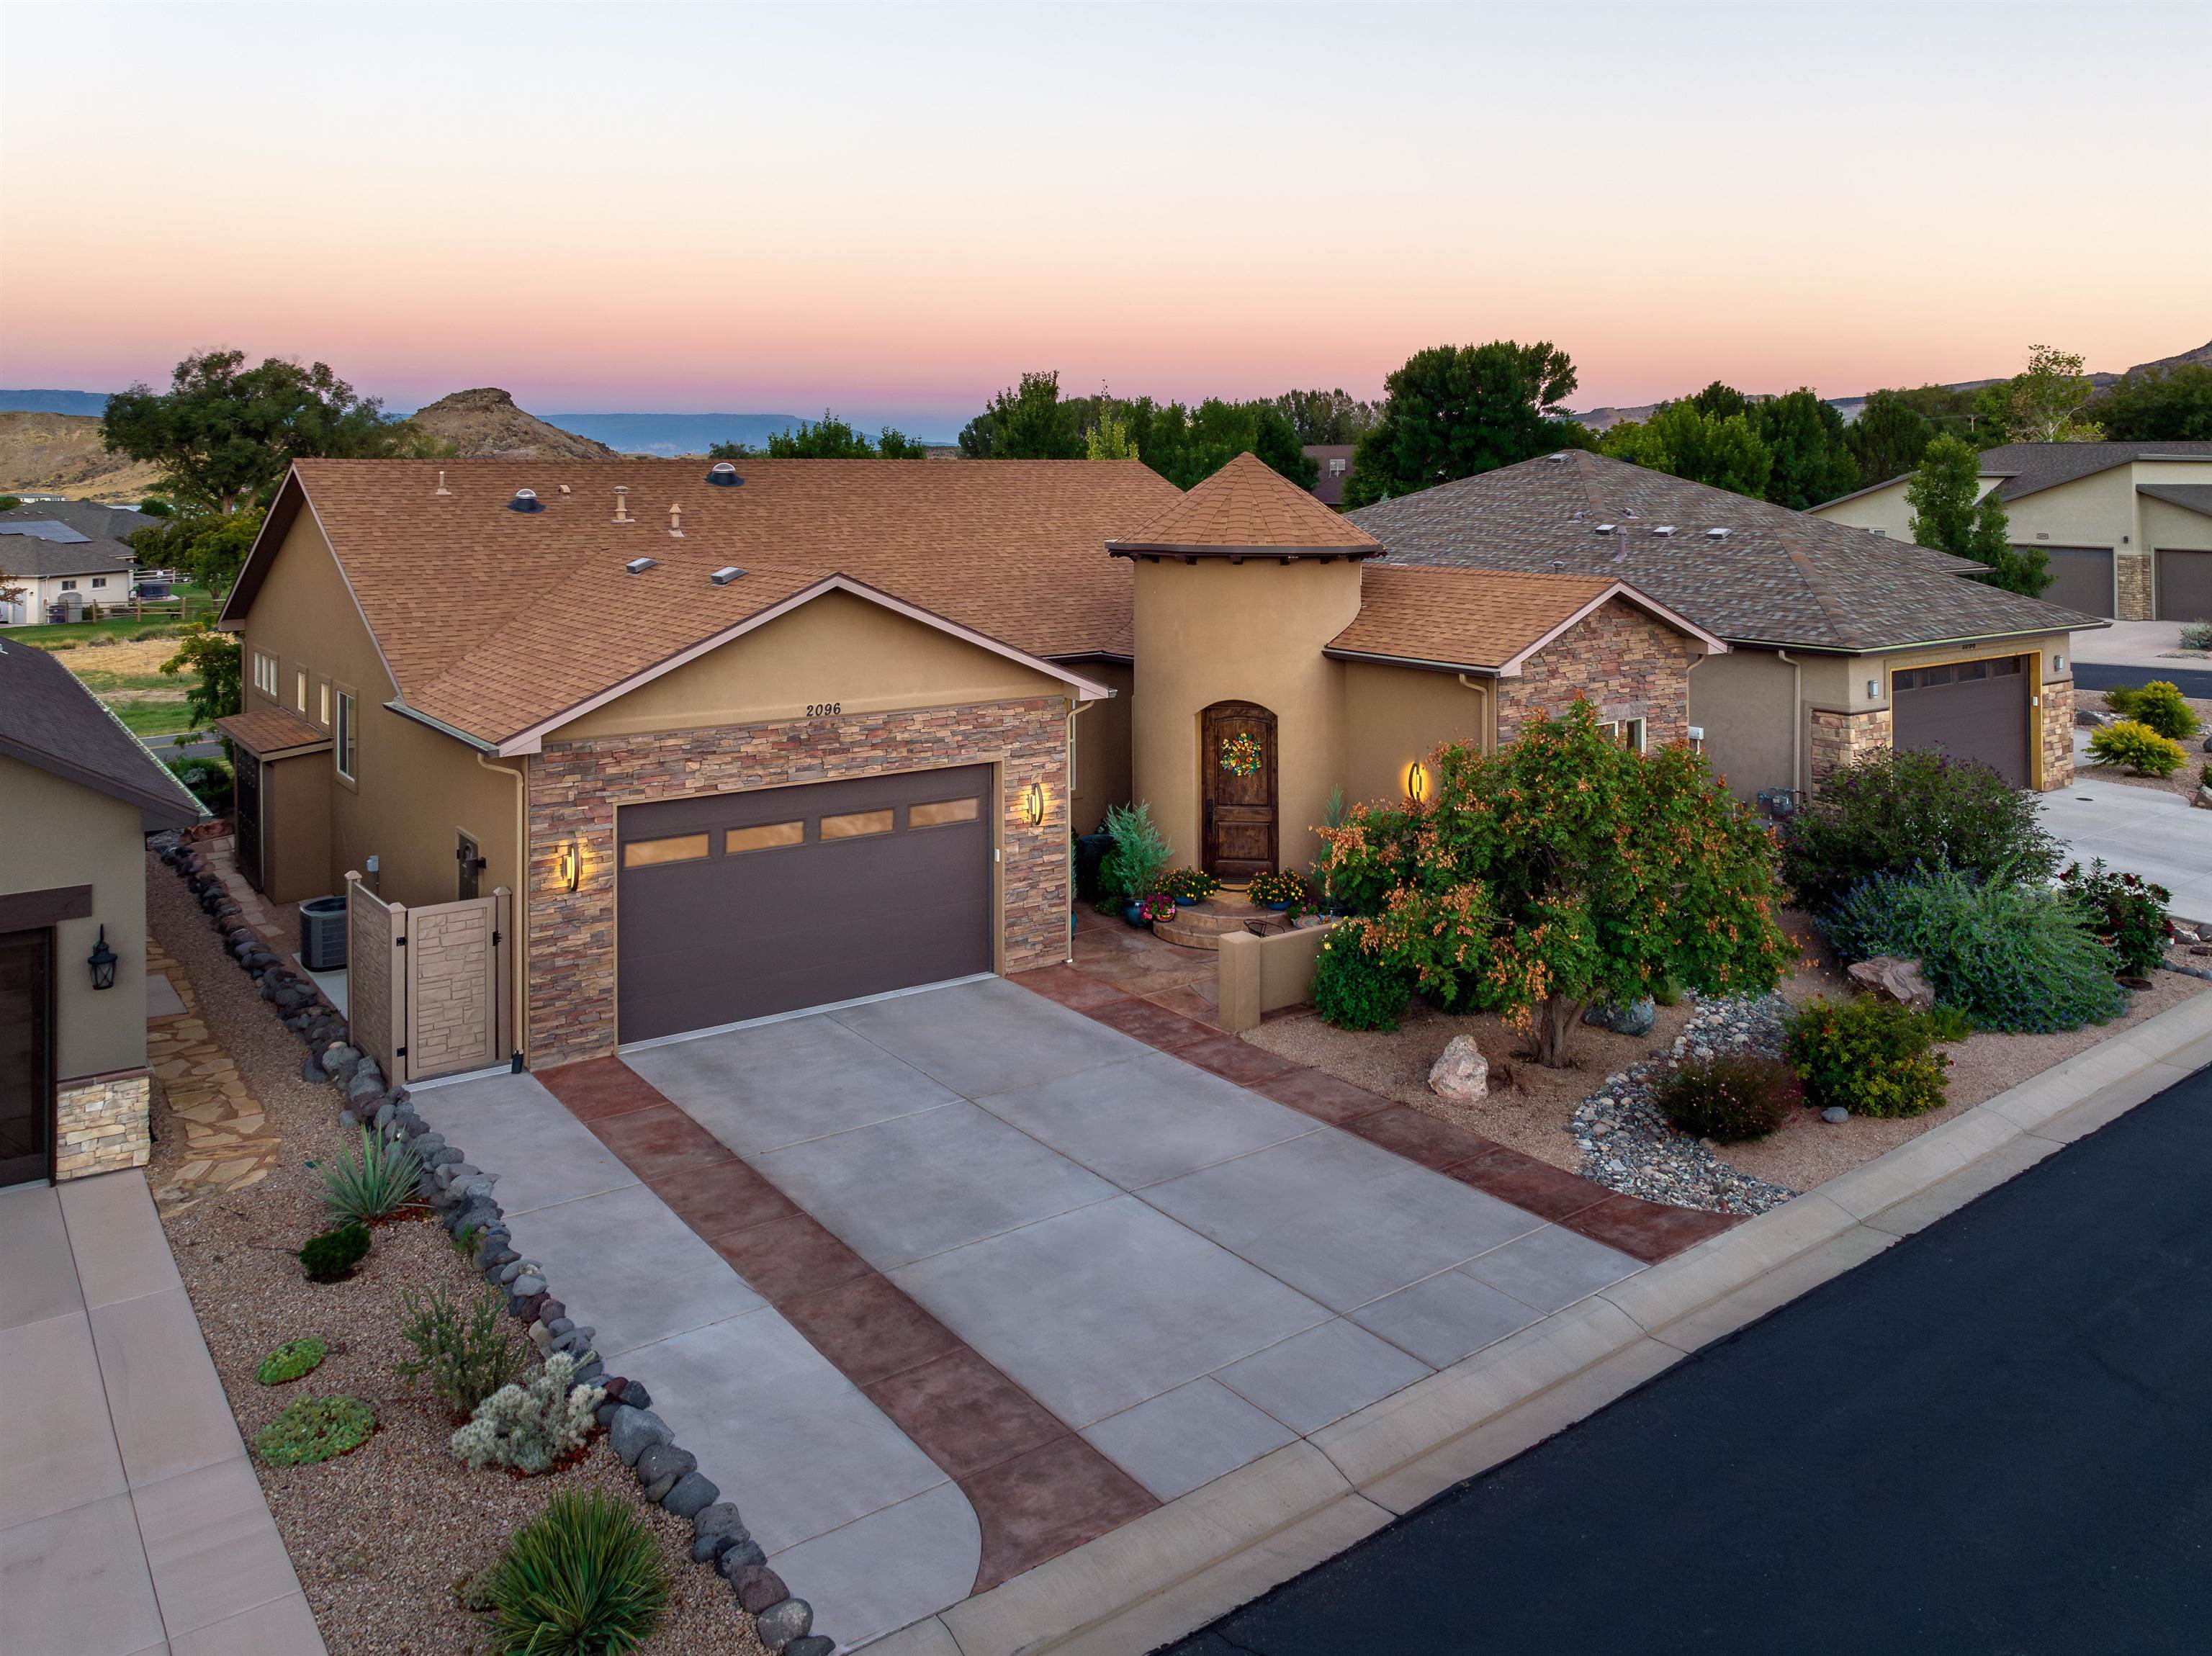 Custom build by Fisher Construction in the highly sought after neighborhood of Fairway Villas. Copious outdoor activities await you with this inciting location. The subdivision is adjacent to the Tiara Rado Golf Course, steps away from the Kindred Reserve open space park, and only minutes to the hiking trails on the Colorado National Monument. Enjoy the stunning red cliffs of the Monument from the courtyard located in front of the home. Impressive stamped and stained concrete leads you from the driveway all the way to the front door. Upon entering a 22' entryway welcomes you into this stunning home. Vaulted and tray ceilings stretch overhead. Natural light flows in from windows and recently added sun tubes. Granite counter tops, and stainless appliances in a kitchen that was made  for entertaining. adjacent  to the kitchen is an area flexible for a study, den or formal dining area. The possibilities are endless. The primary en-suite is bright and inviting with fresh tile and heated tile floor. The back patio boasts an expansive Trex deck, ceiling fans and retractable shade screens for ultimate comfort and privacy. Step inside for your private showing today!